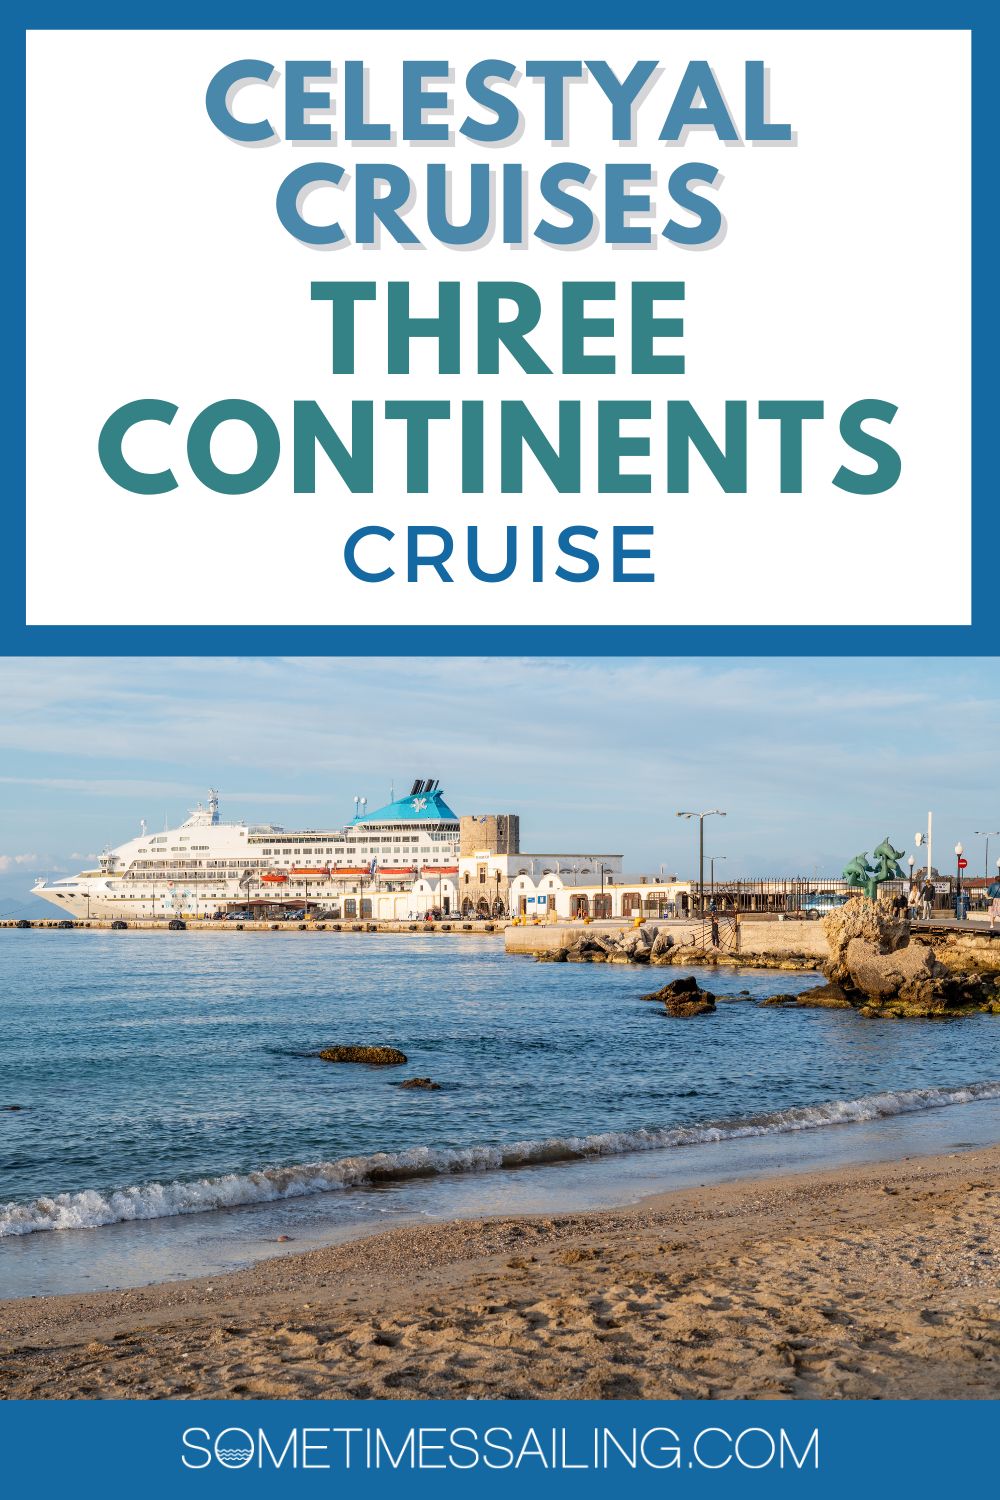 Celestyal Cruises Three Continents Cruise with Bucket List Sightseeing with a picture of the cruise ship in port in Rhodes, Greece.